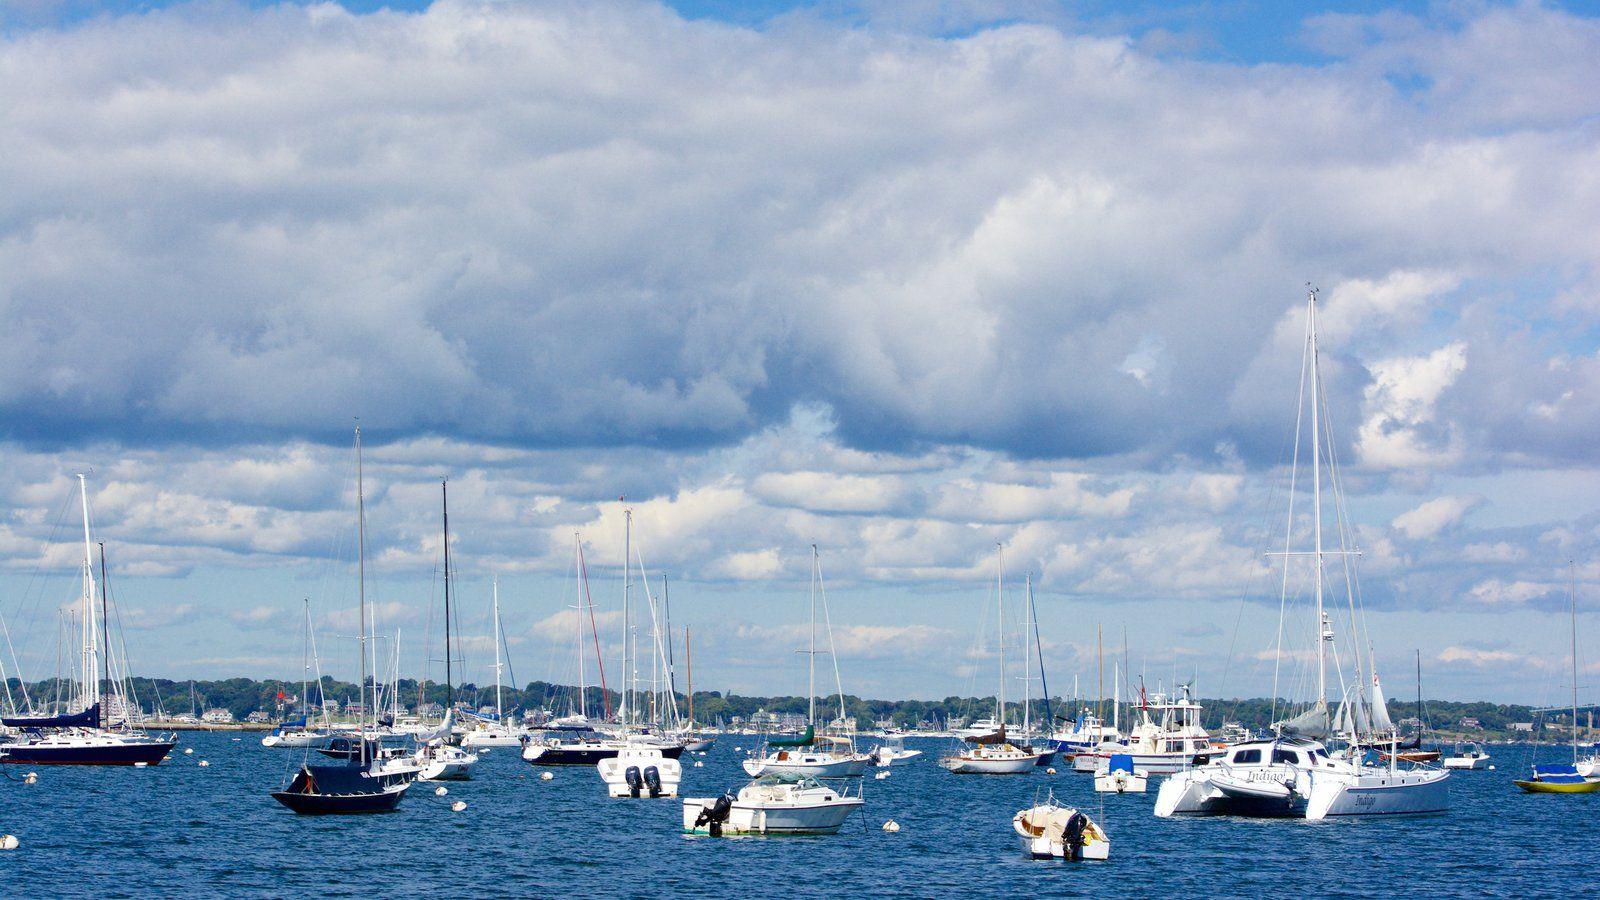 Watersports Pictures View Wallpaper of Newport Rhode Island